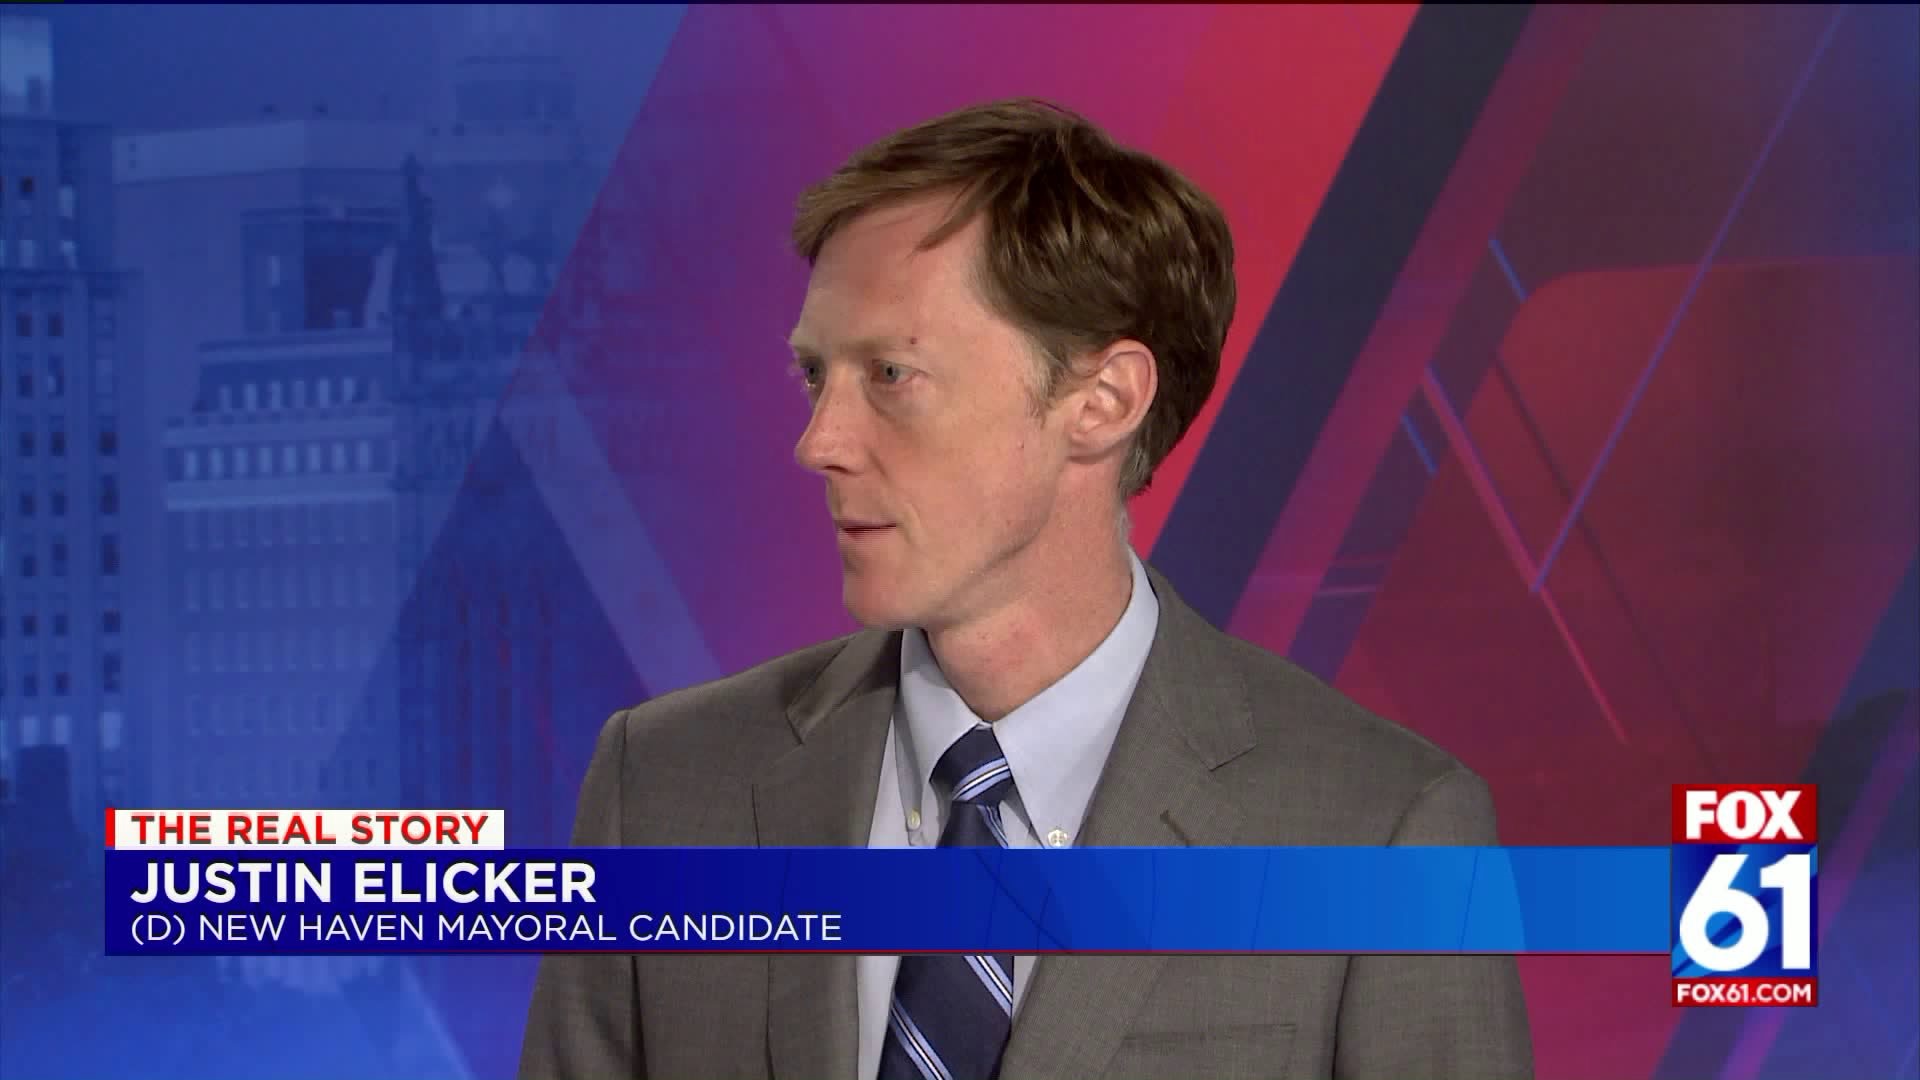 Real Story - Justin Elicker after the primary